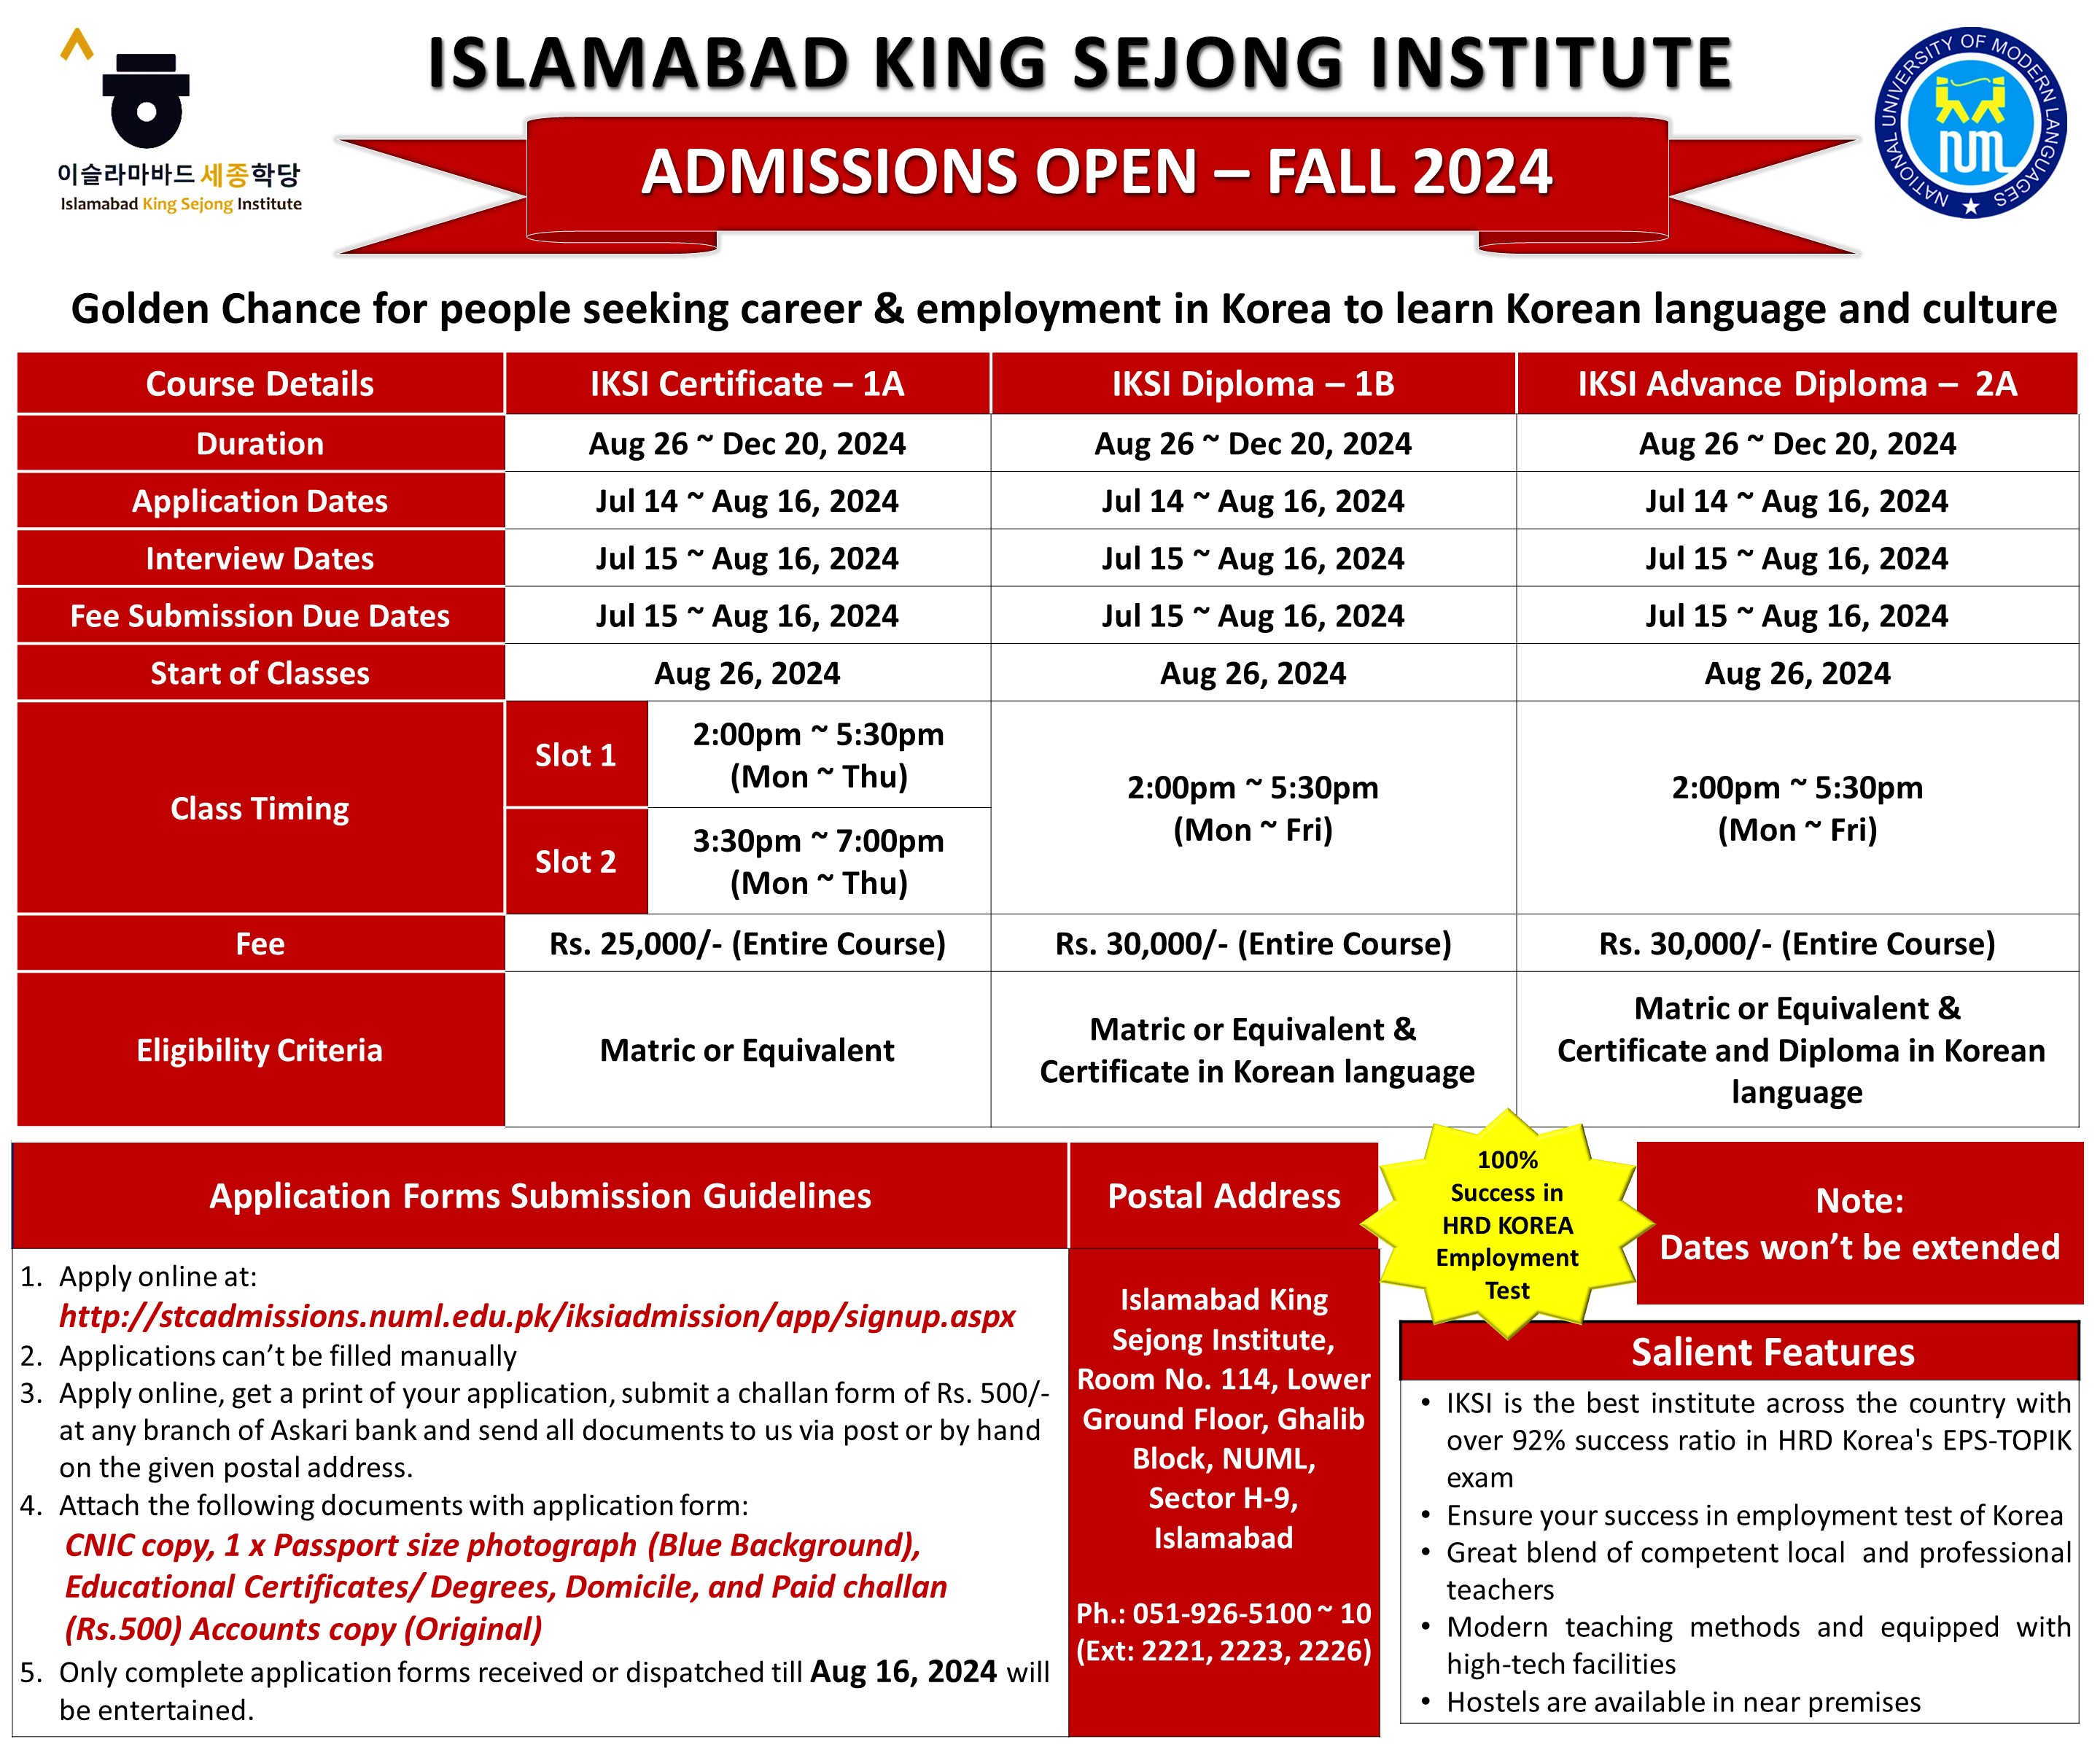 FALL 2024 ADMISSIONS OPEN (IKSI)